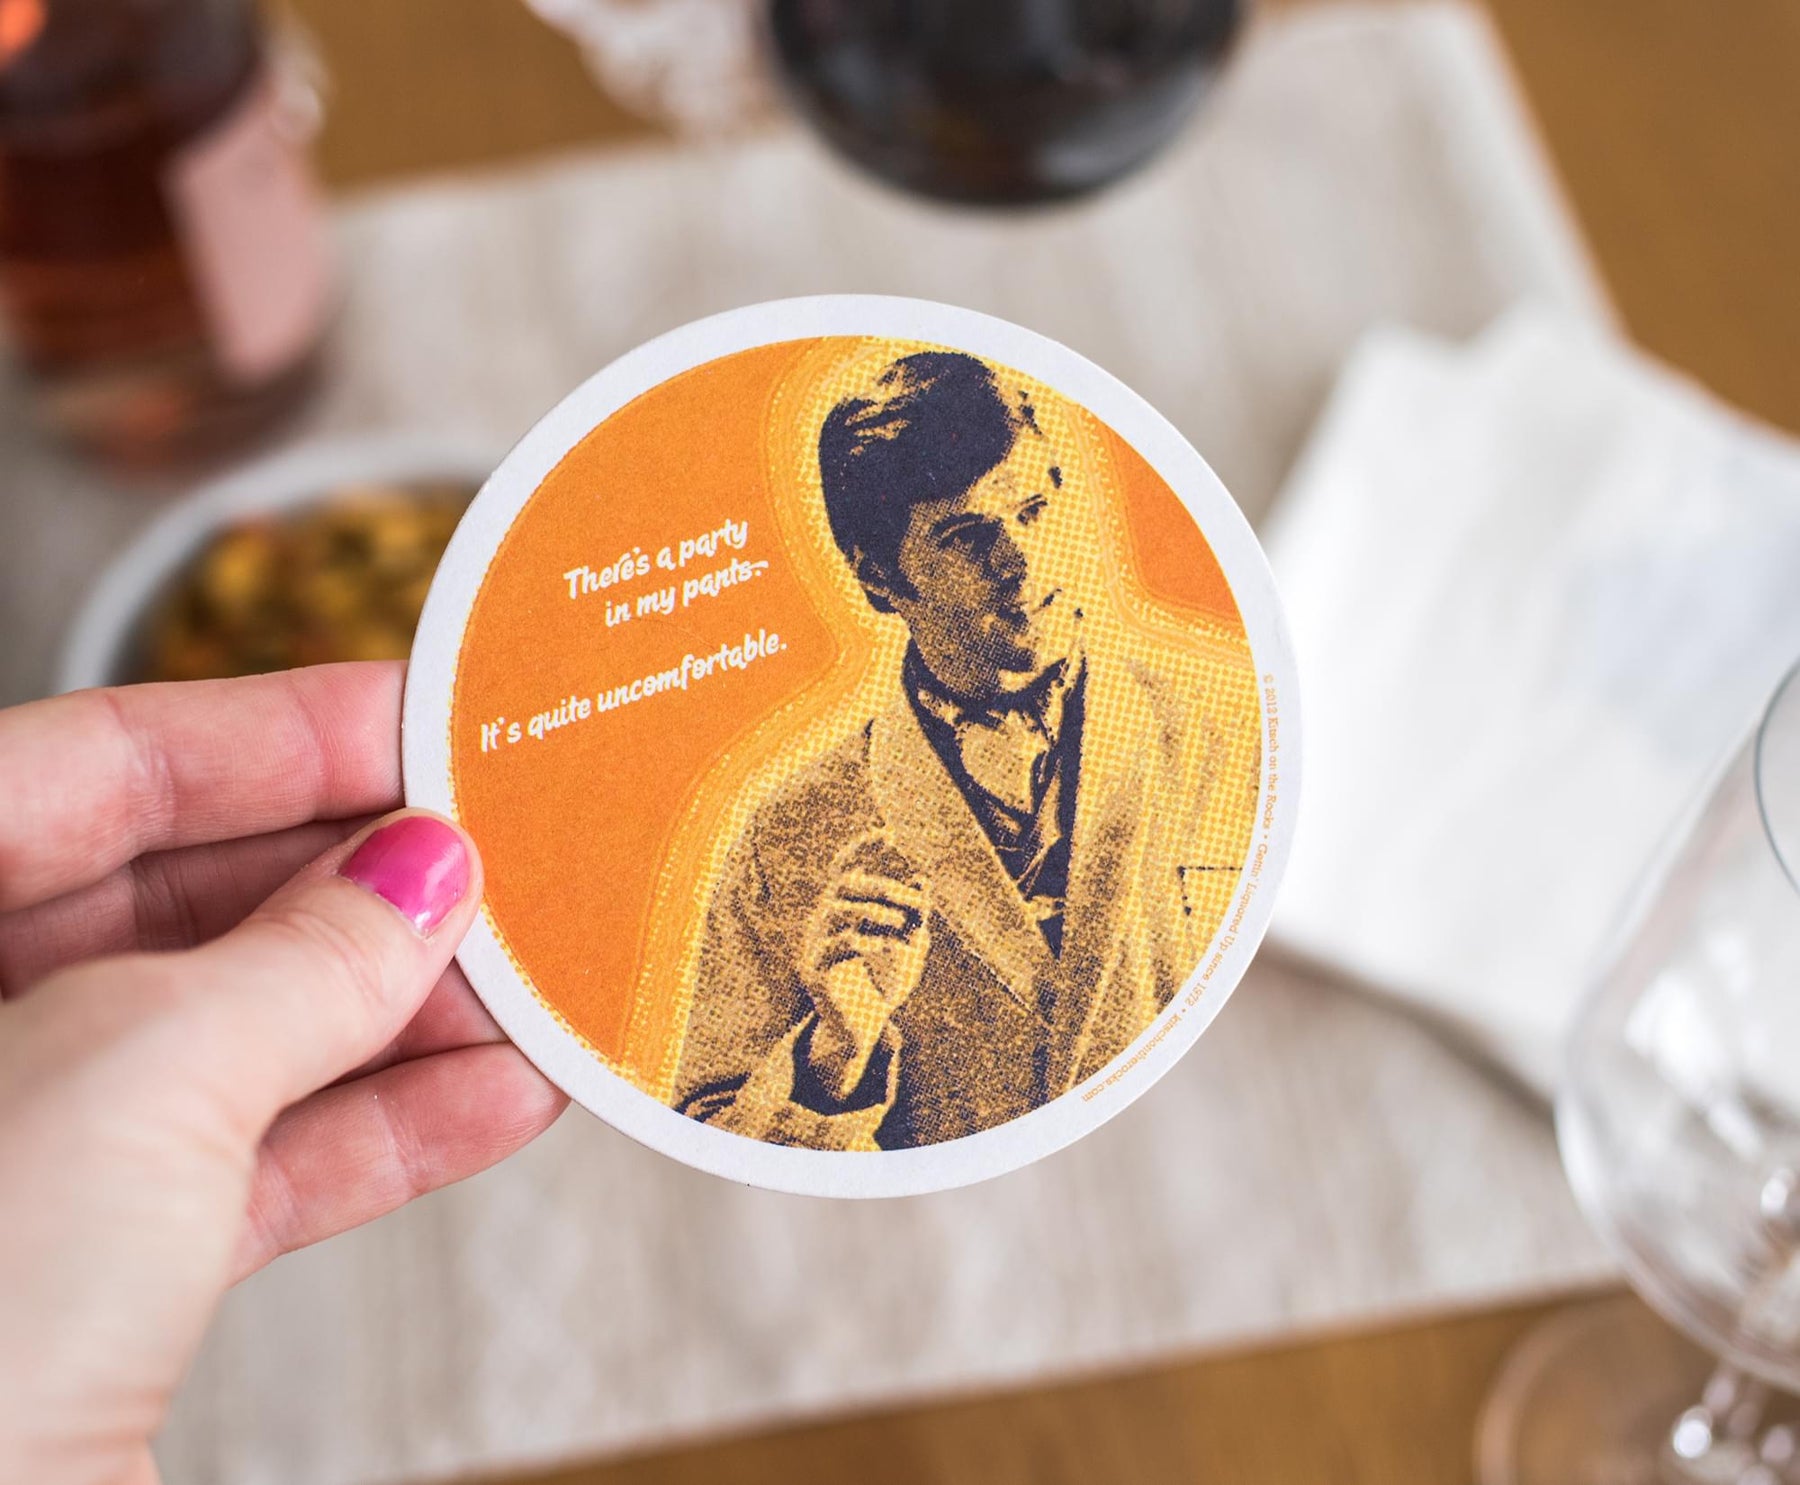 Single Retro Cork Drink Coaster -  Party In My Pants. Its Quite Uncomfortable